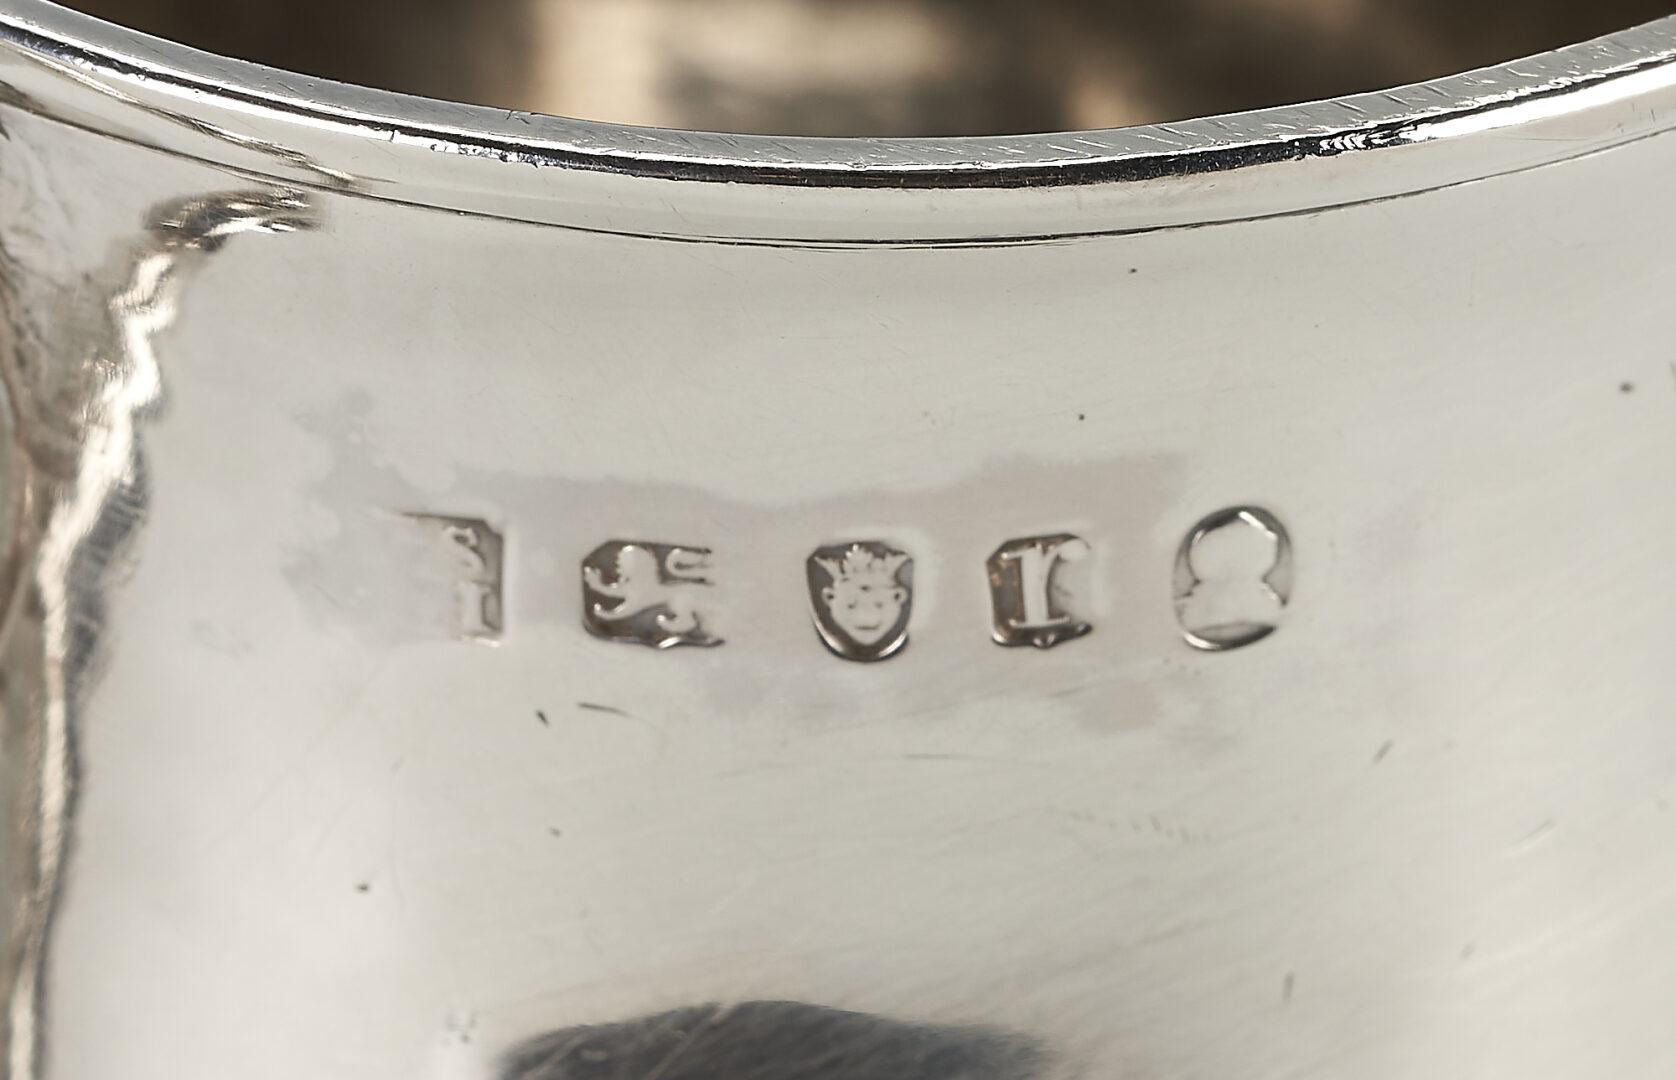 Lot 52: 3 English 18th C. Sterling Silver Mugs or Canns